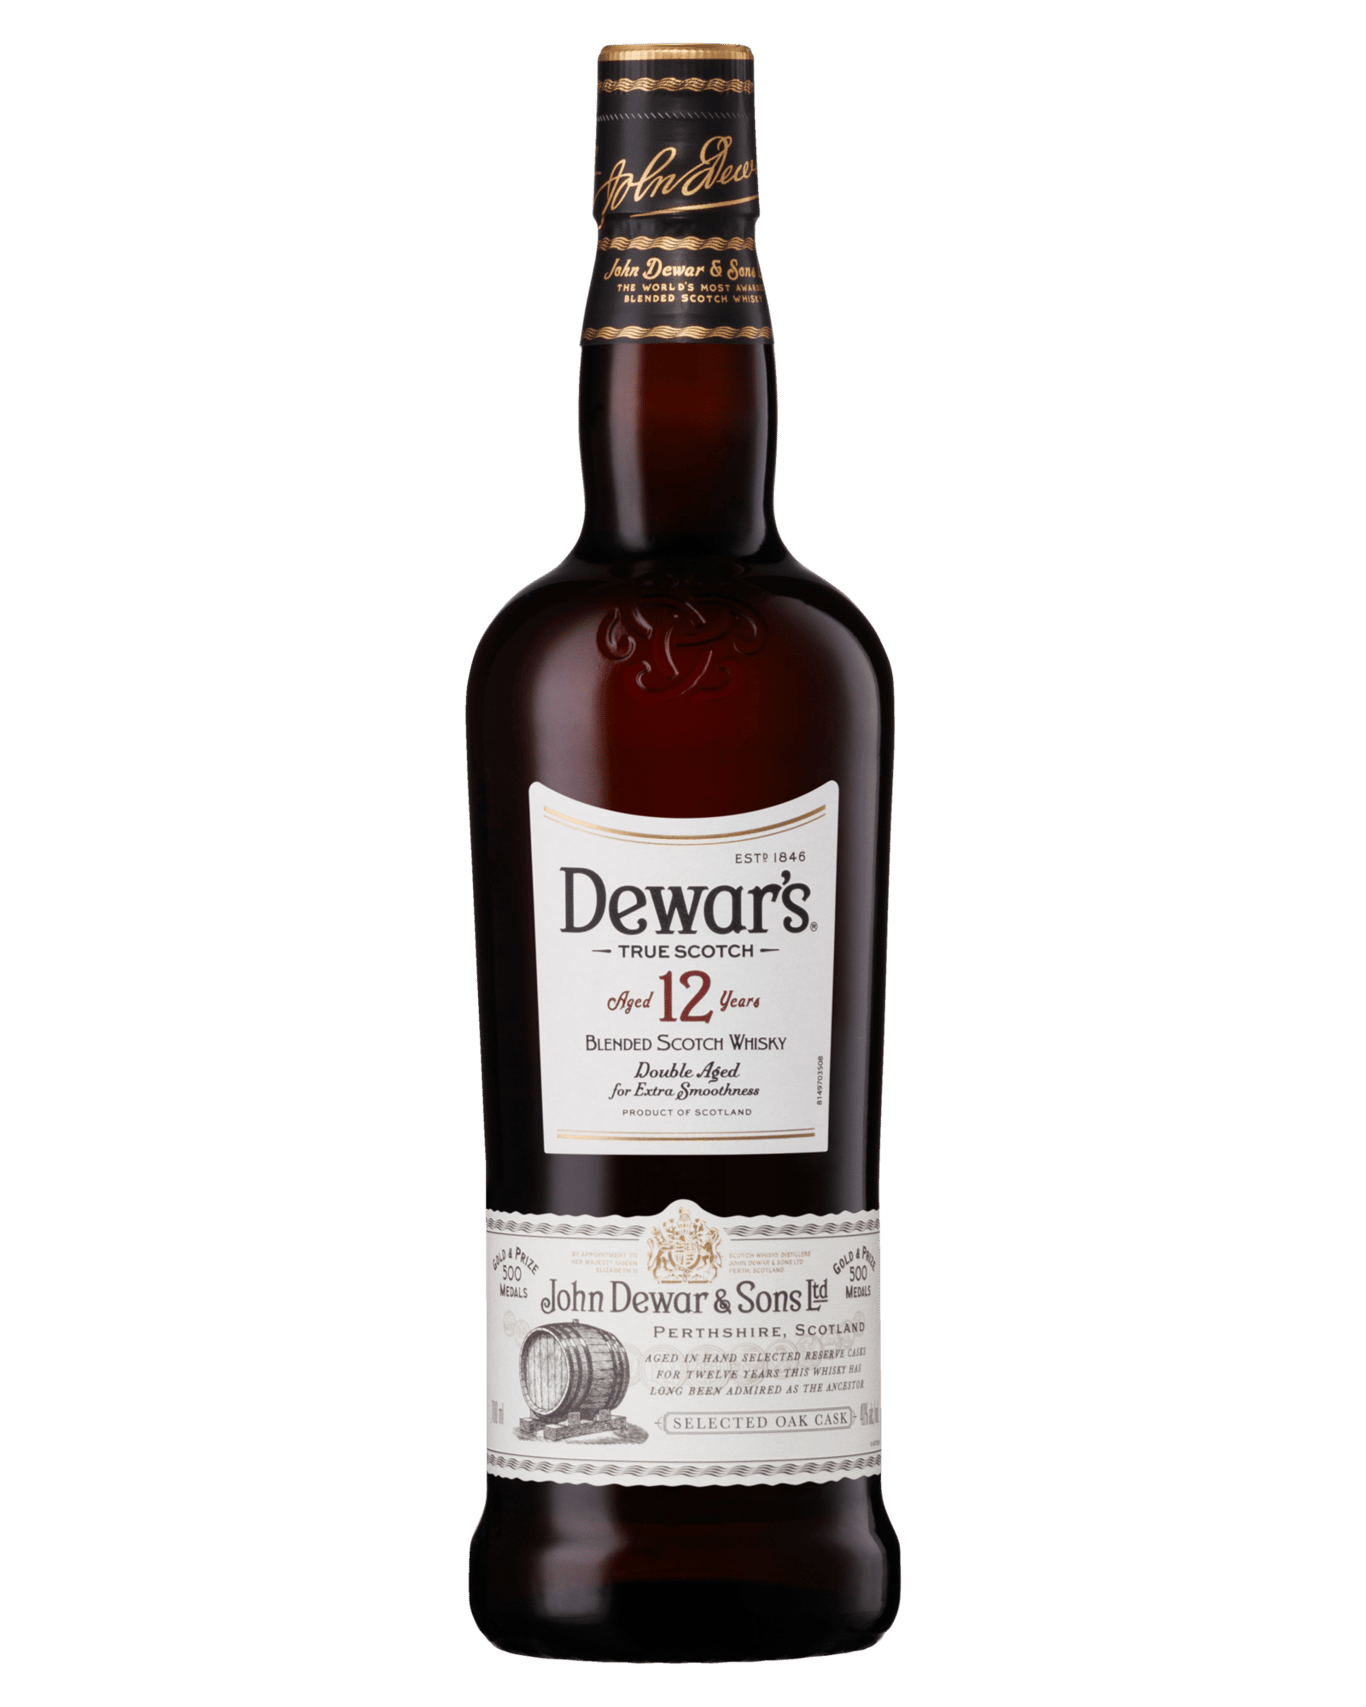 Buy Dewar's 12 Year Old Blended Scotch Whisky 700ml Online (Lowest ...